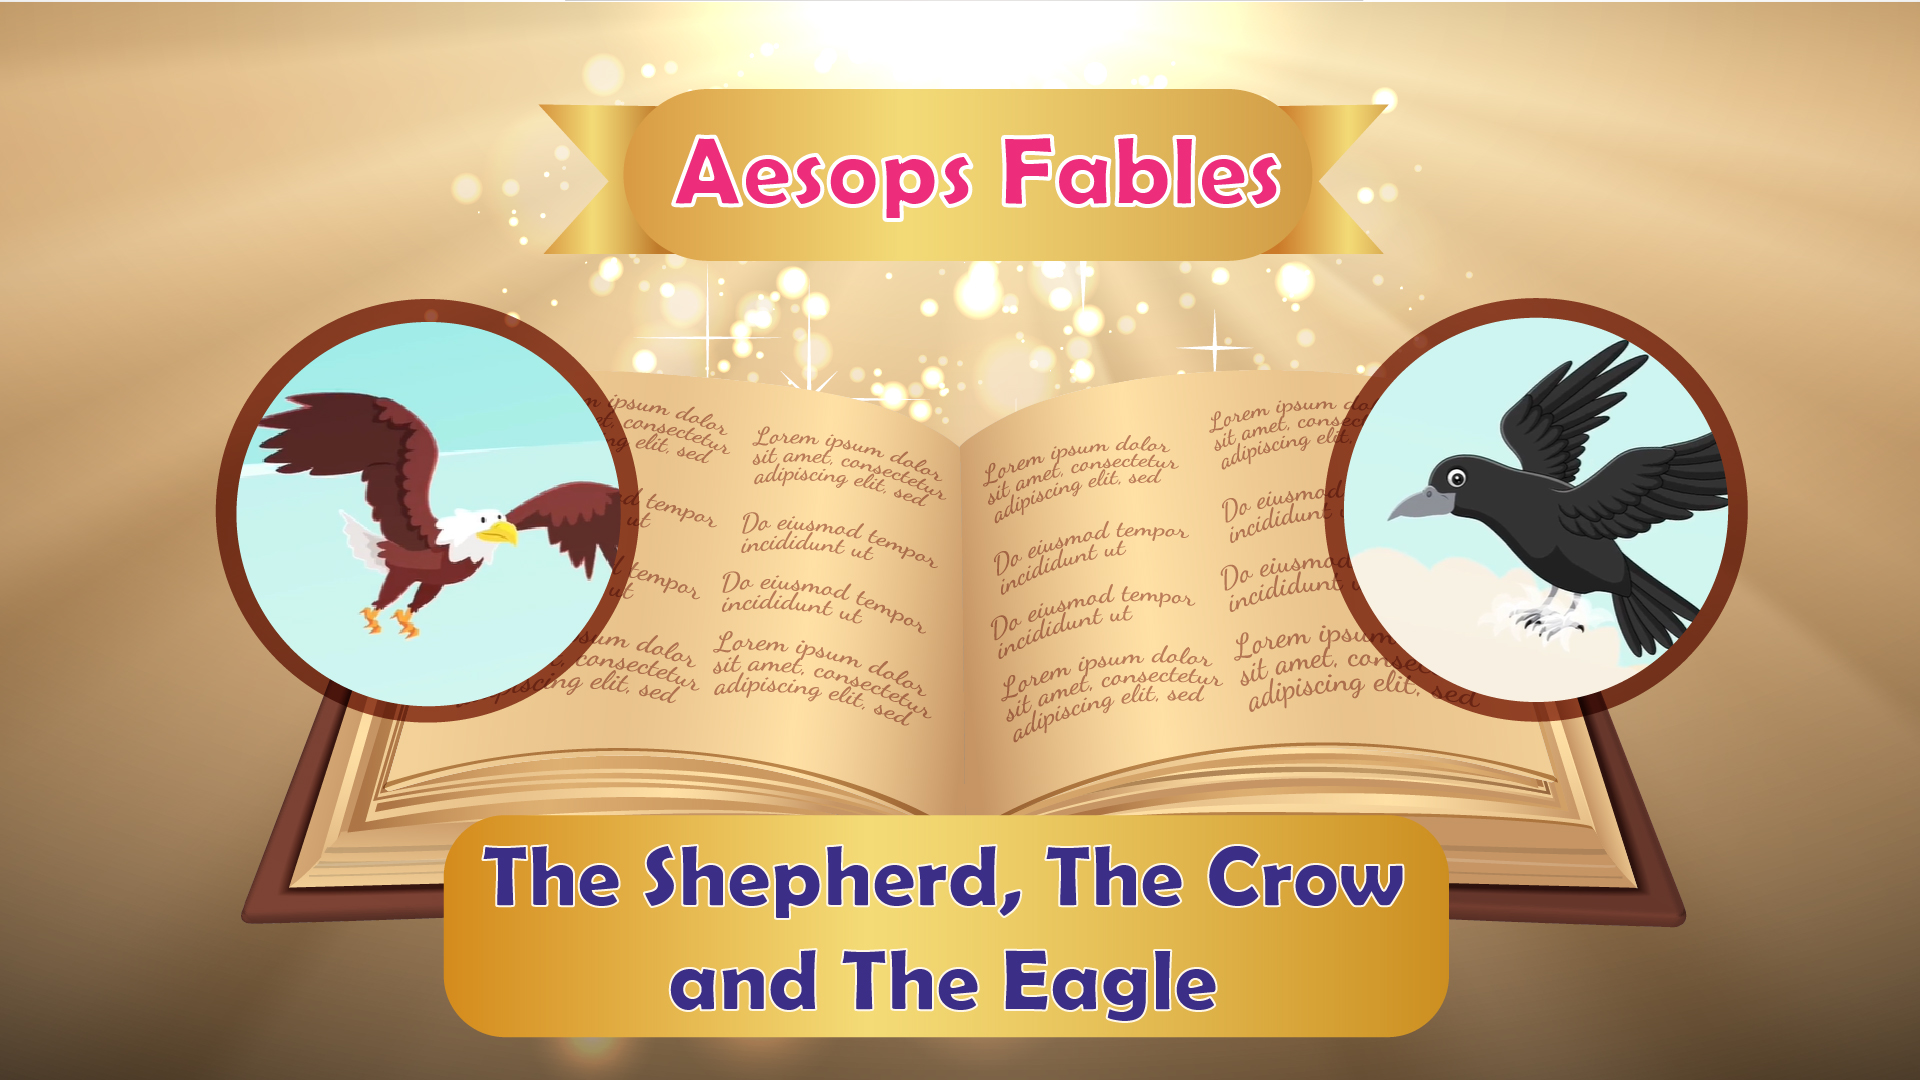 The Shepherd, the Crow and the Eagle